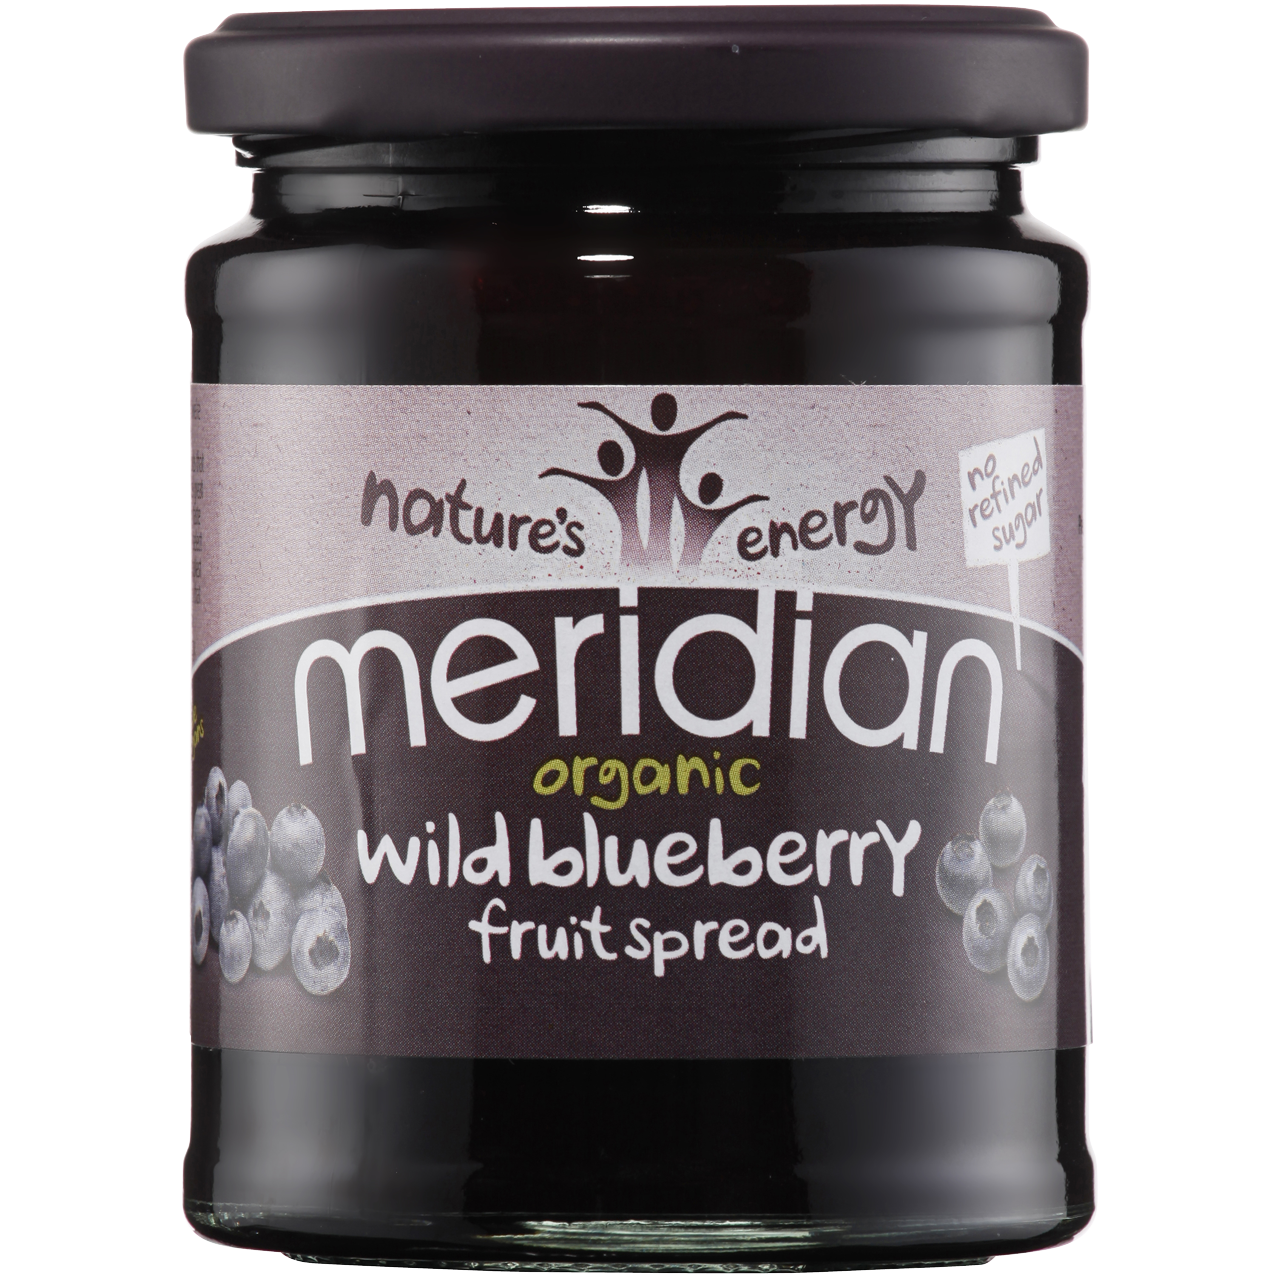 Meridian Organic Wild Blueberry Fruit Spread 284g - Just Natural